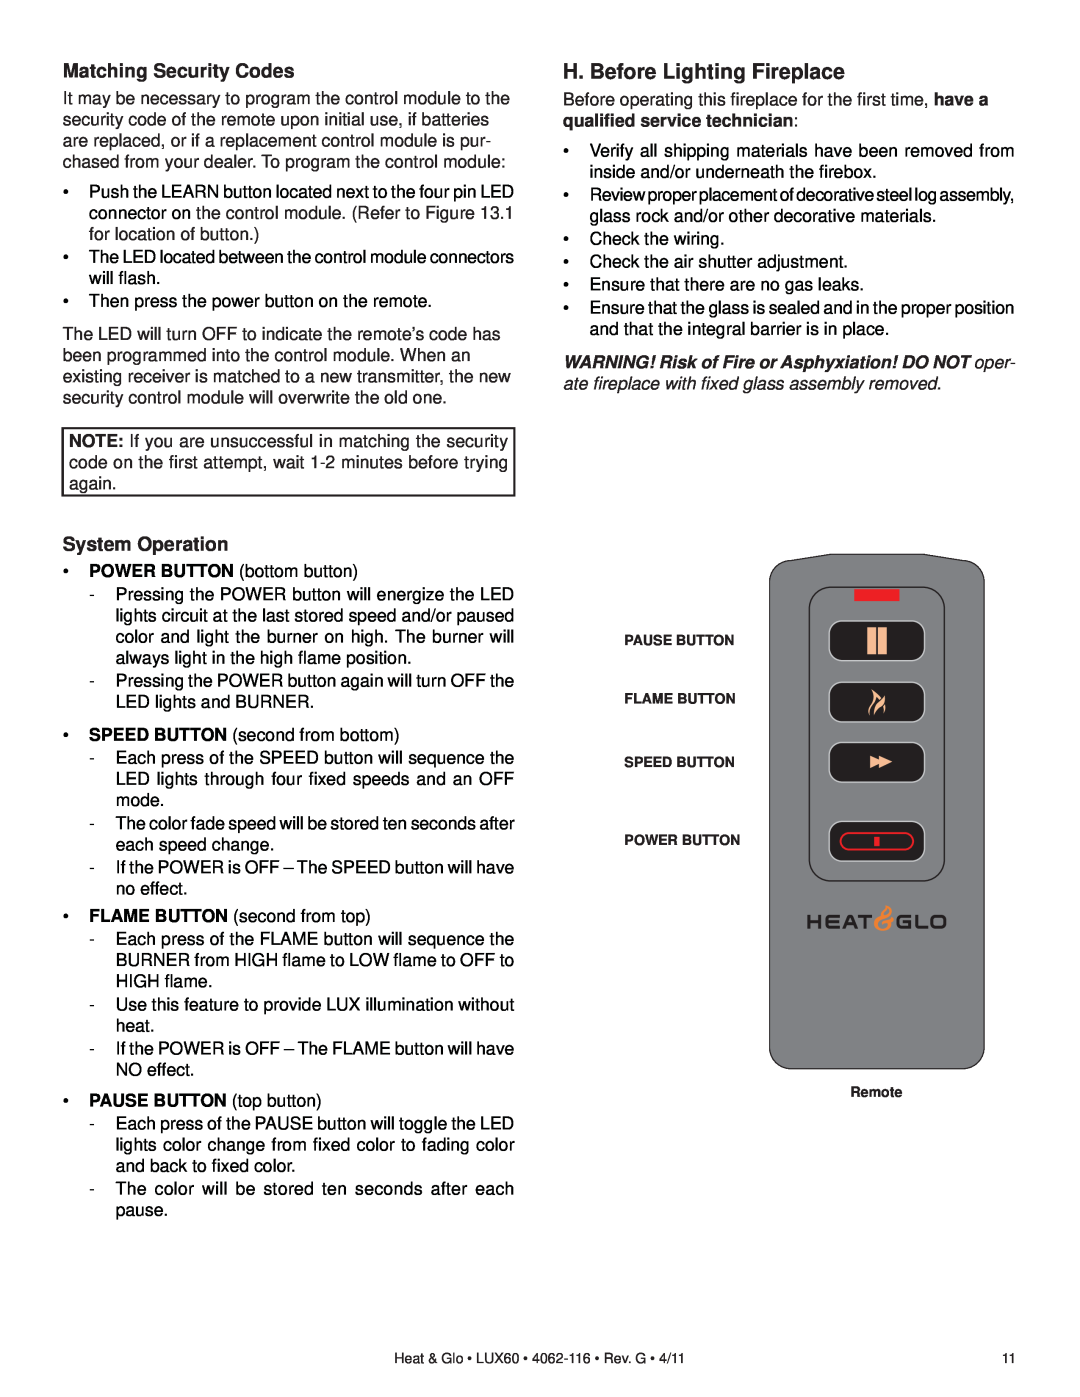 Heat & Glo LifeStyle LUX60 owner manual H. Before Lighting Fireplace, Matching Security Codes, System Operation 